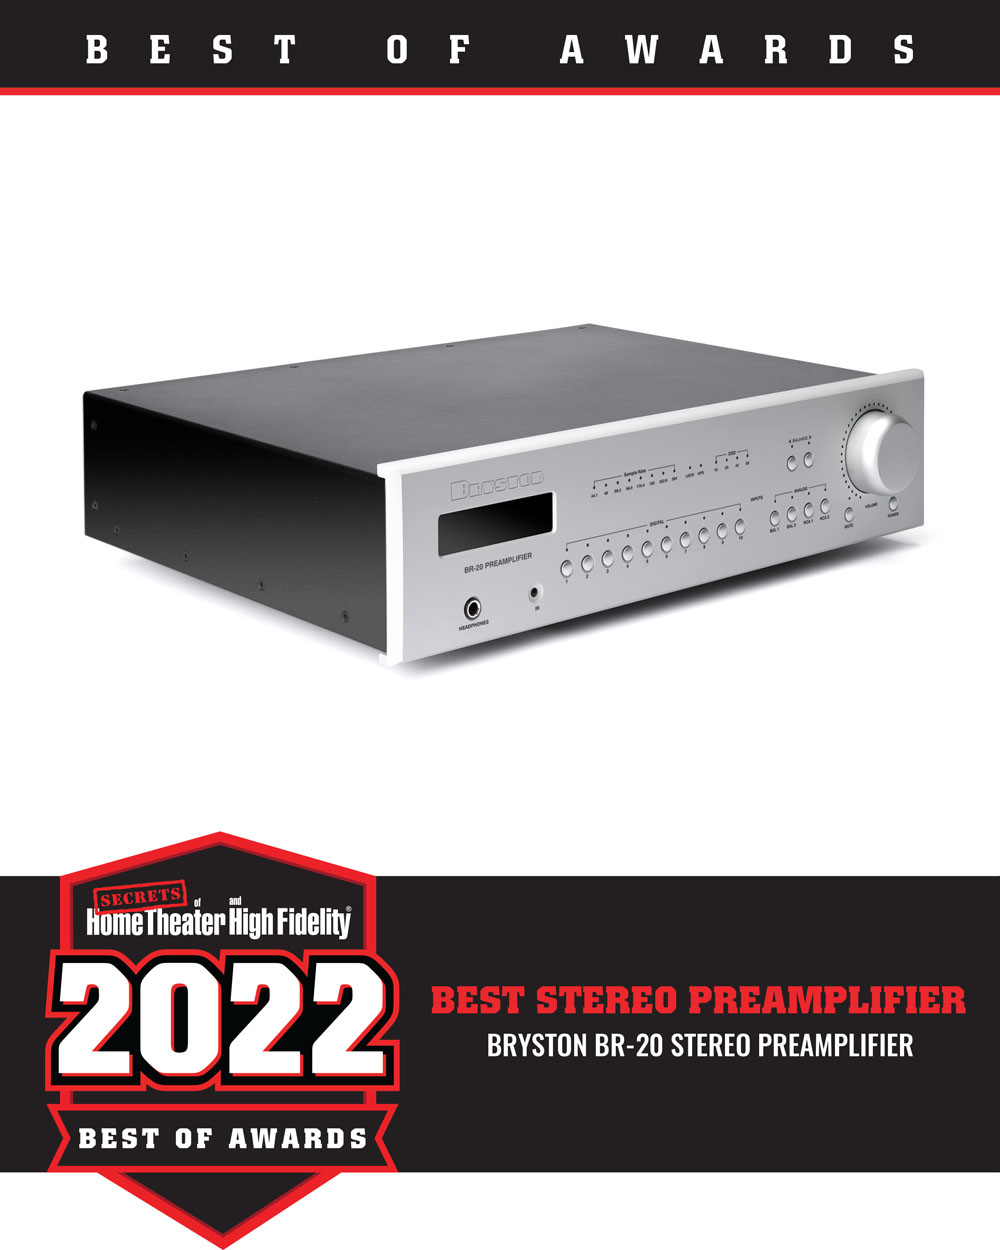 Bryston BR-20 Stereo Preamplifier Best of 2022 Award